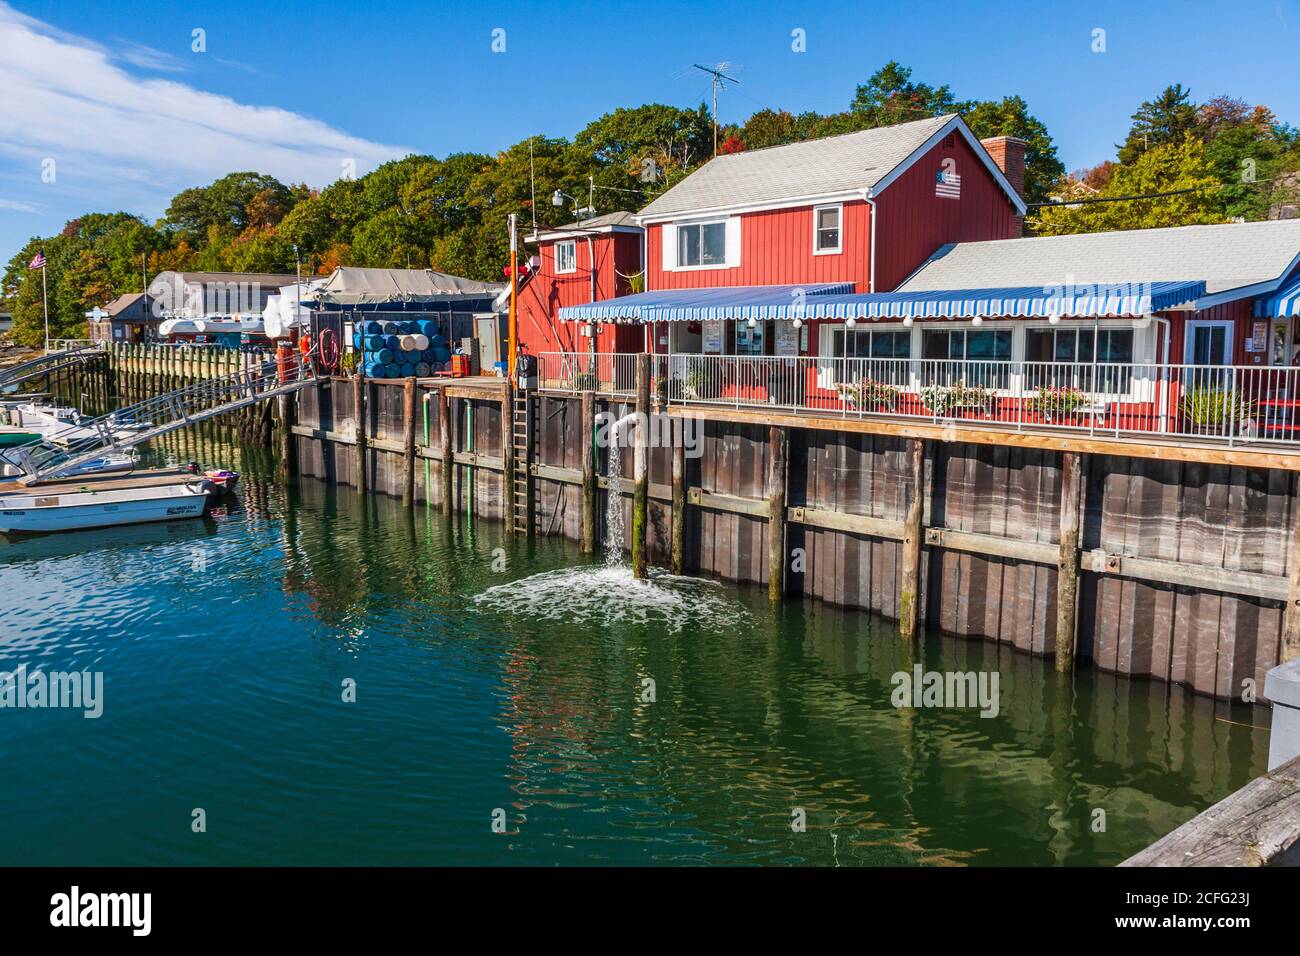 Freeport Town Wharf area at South Freeport harbor, South Freeport, Maine. Harraseeket Lunch and Lobster restaurant in Harraseeket Historic District. Stock Photo